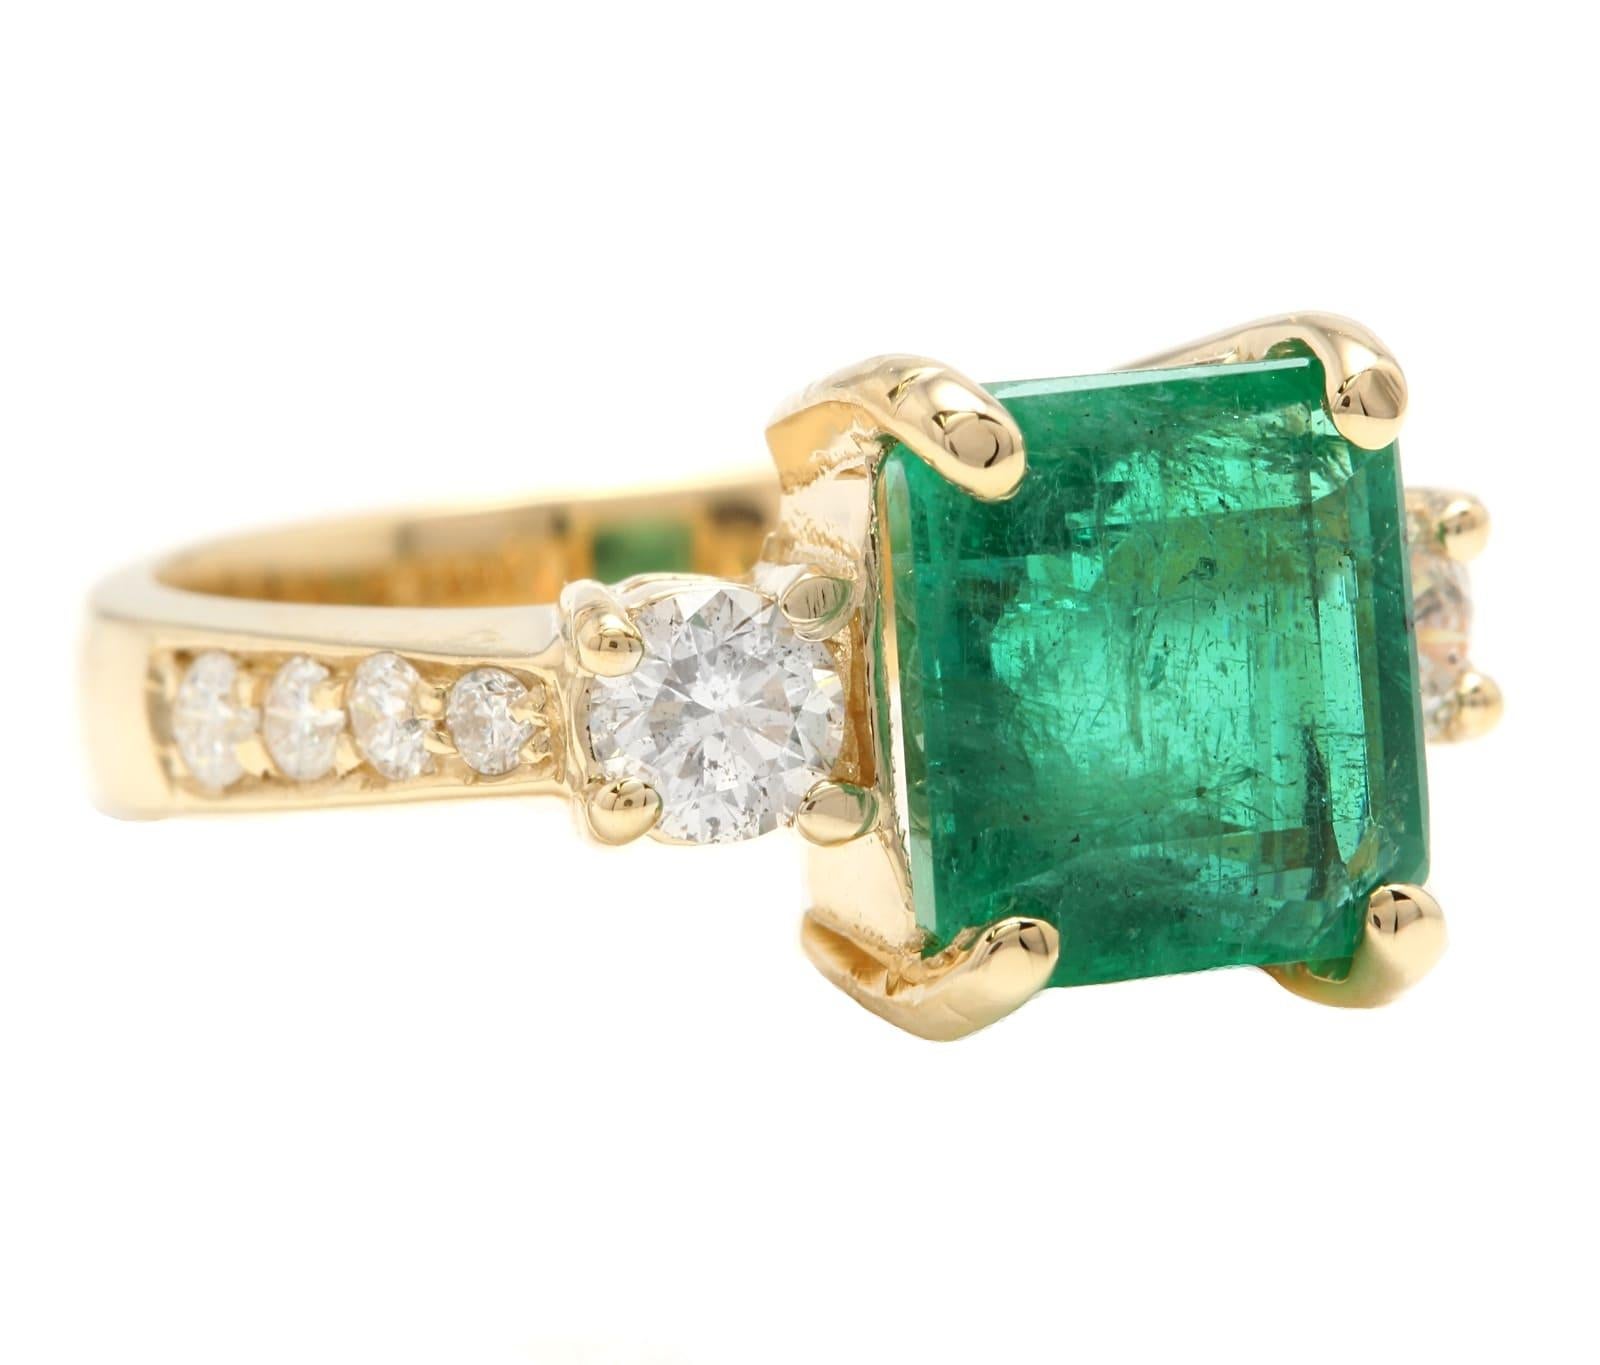 4.00 Carats Natural Emerald and Diamond 14K Solid Yellow Gold Ring

Suggested Replacement Value: $6,000.00

Total Natural Green Emerald Weight is: Approx. 3.40 Carats (transparent)

Emerald Measures: Approx. 8.80 x 8.00mm

Natural Round Diamonds